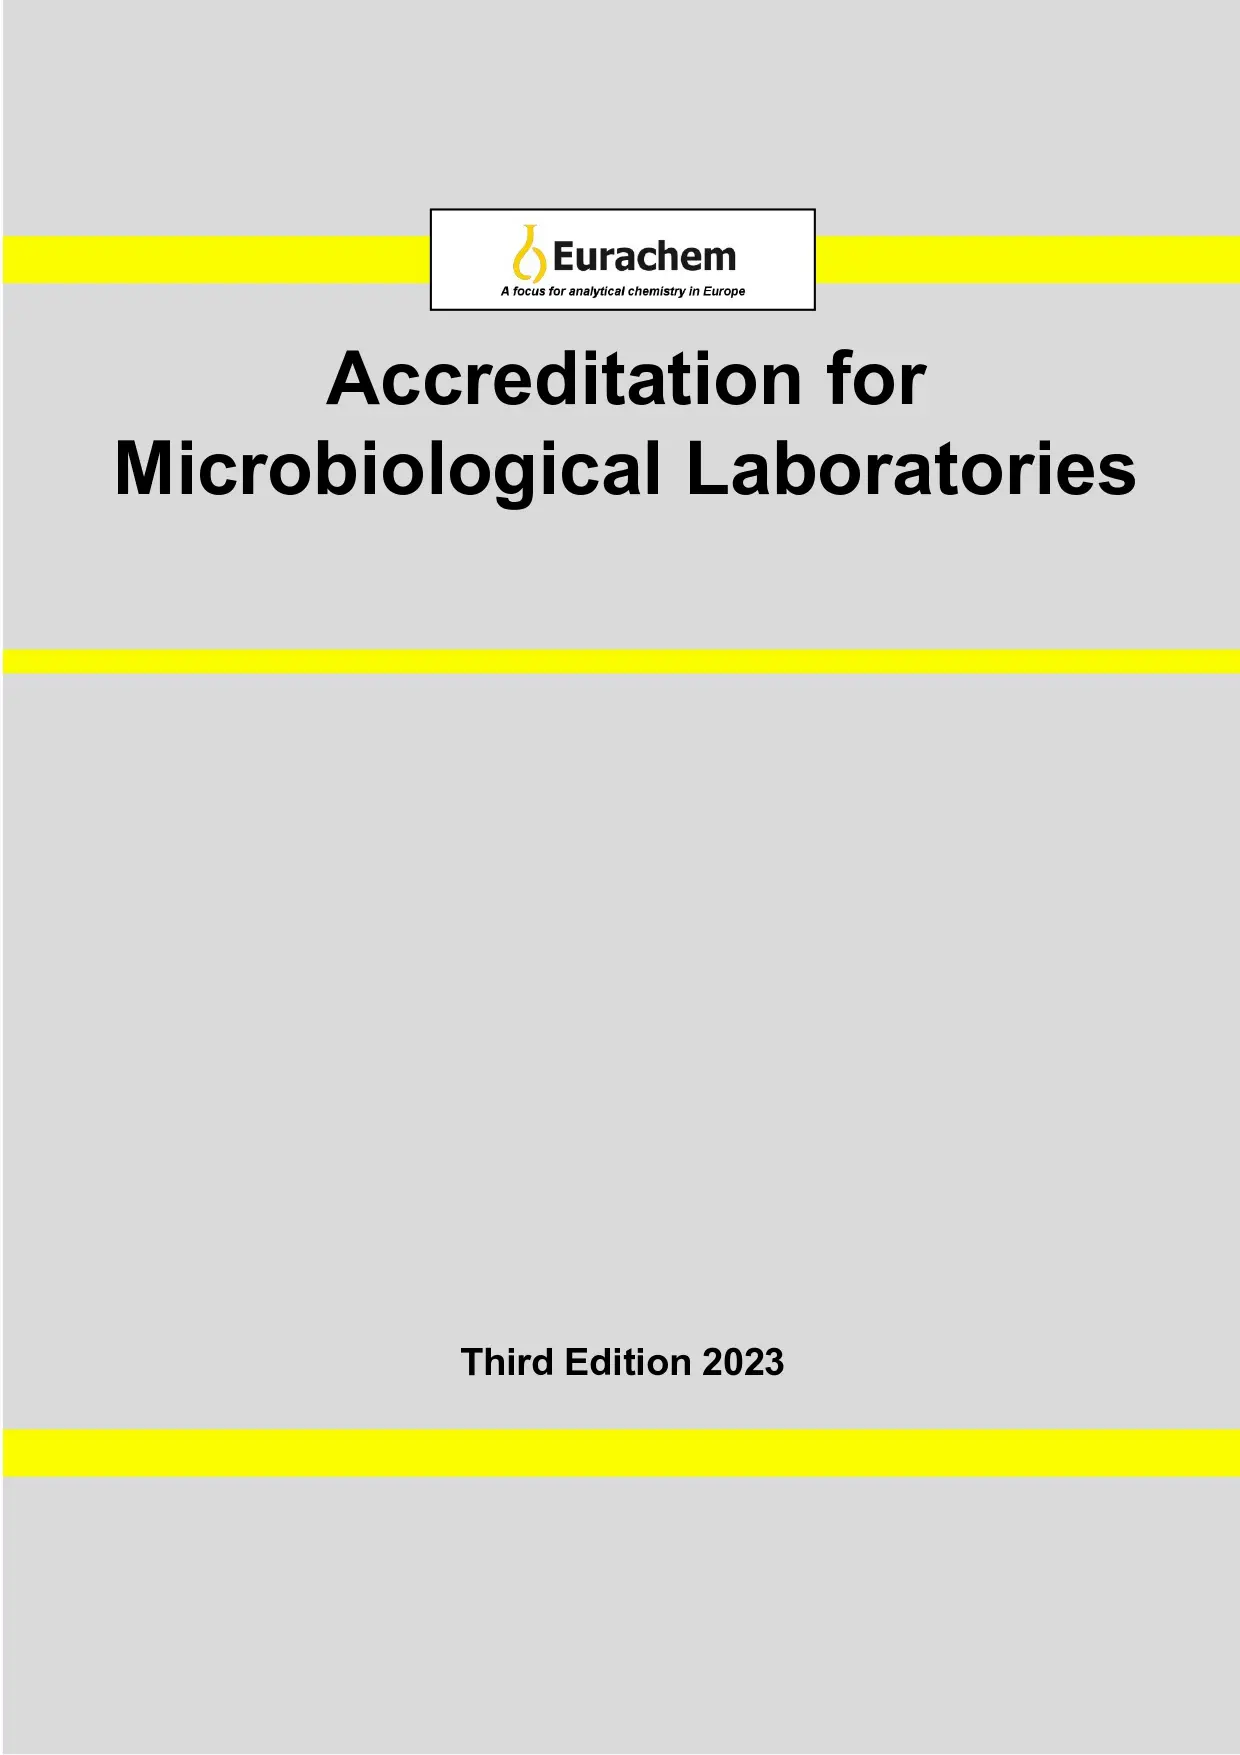 Accreditation for Microbiological Laboratories